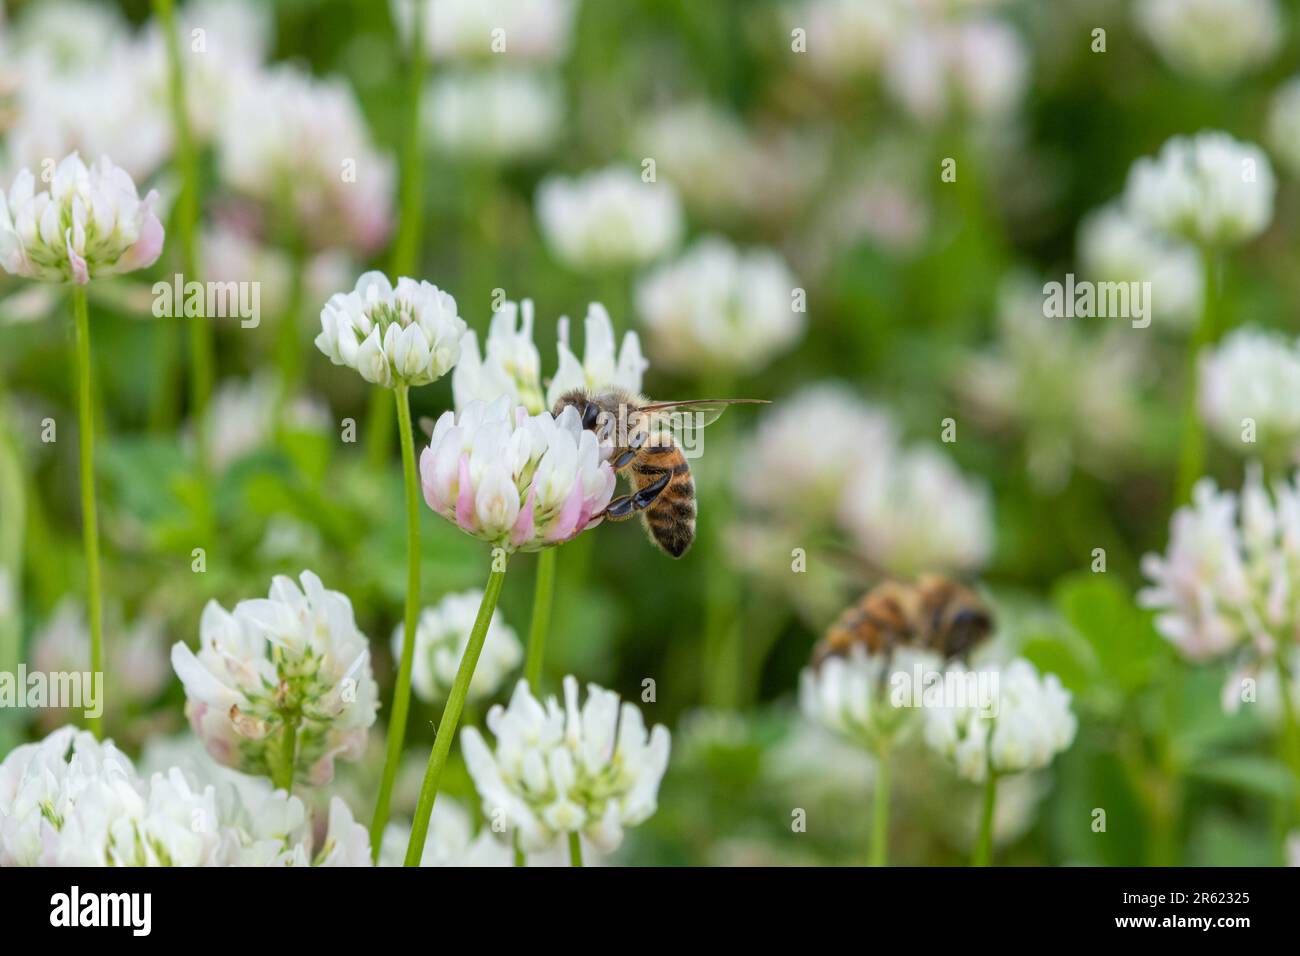 Honey bees (Apis mellifera) insects pollinators nectaring on white clover wildflowers (Trifolium repens) Stock Photo